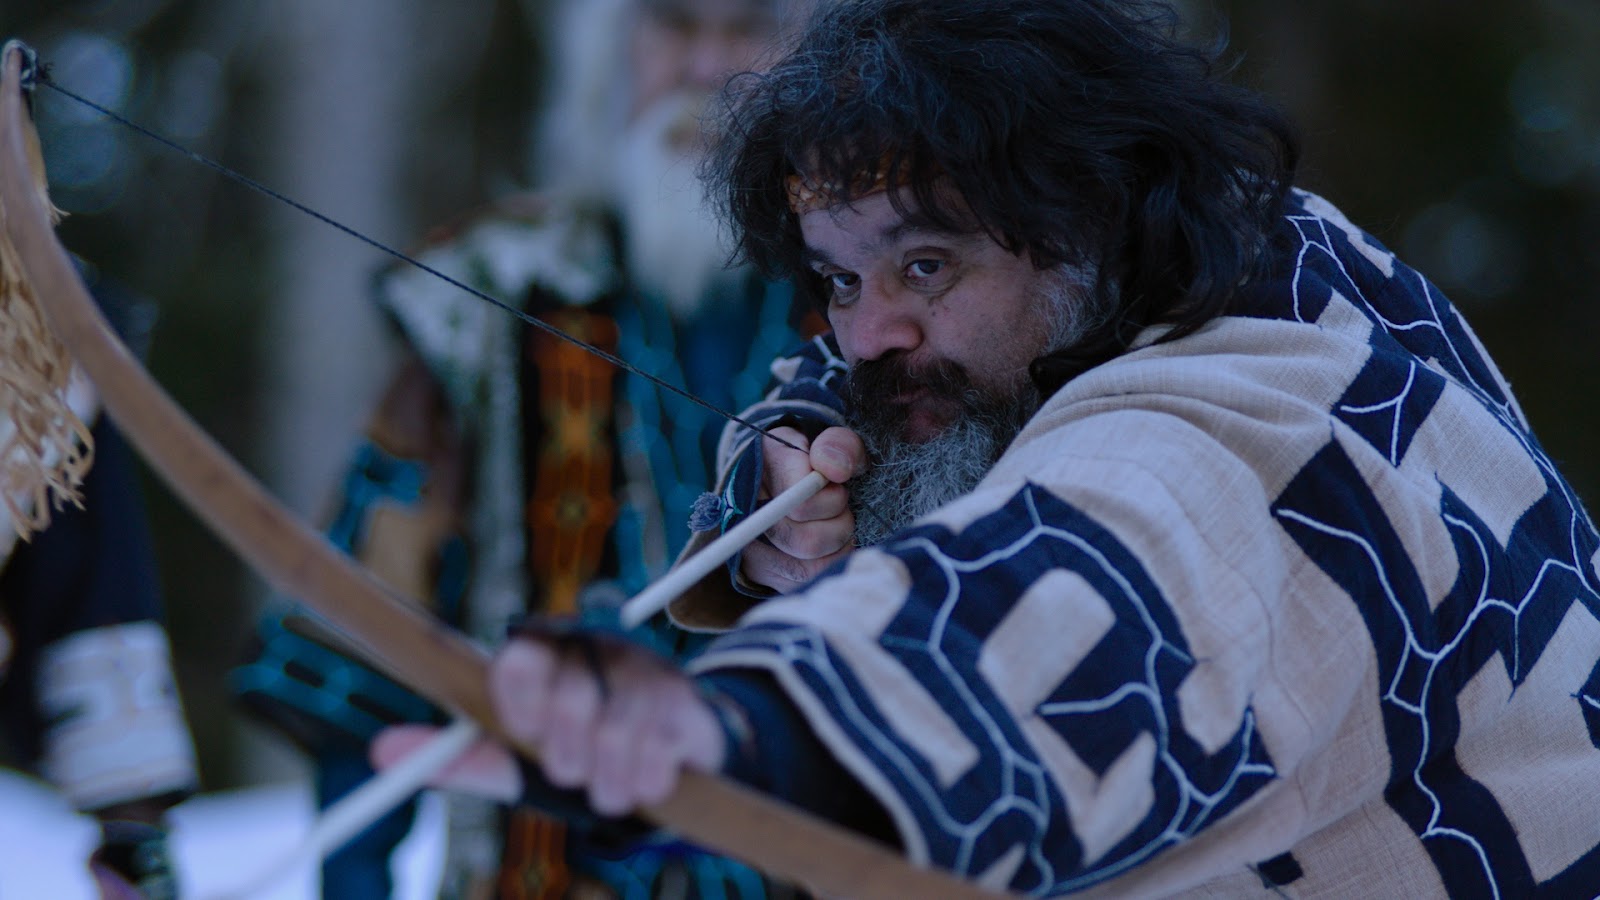 A screen still from Ainu Mosir, featuring a man holding a bow and arrow. He is notching the arrow on the bow, getting ready to let go.